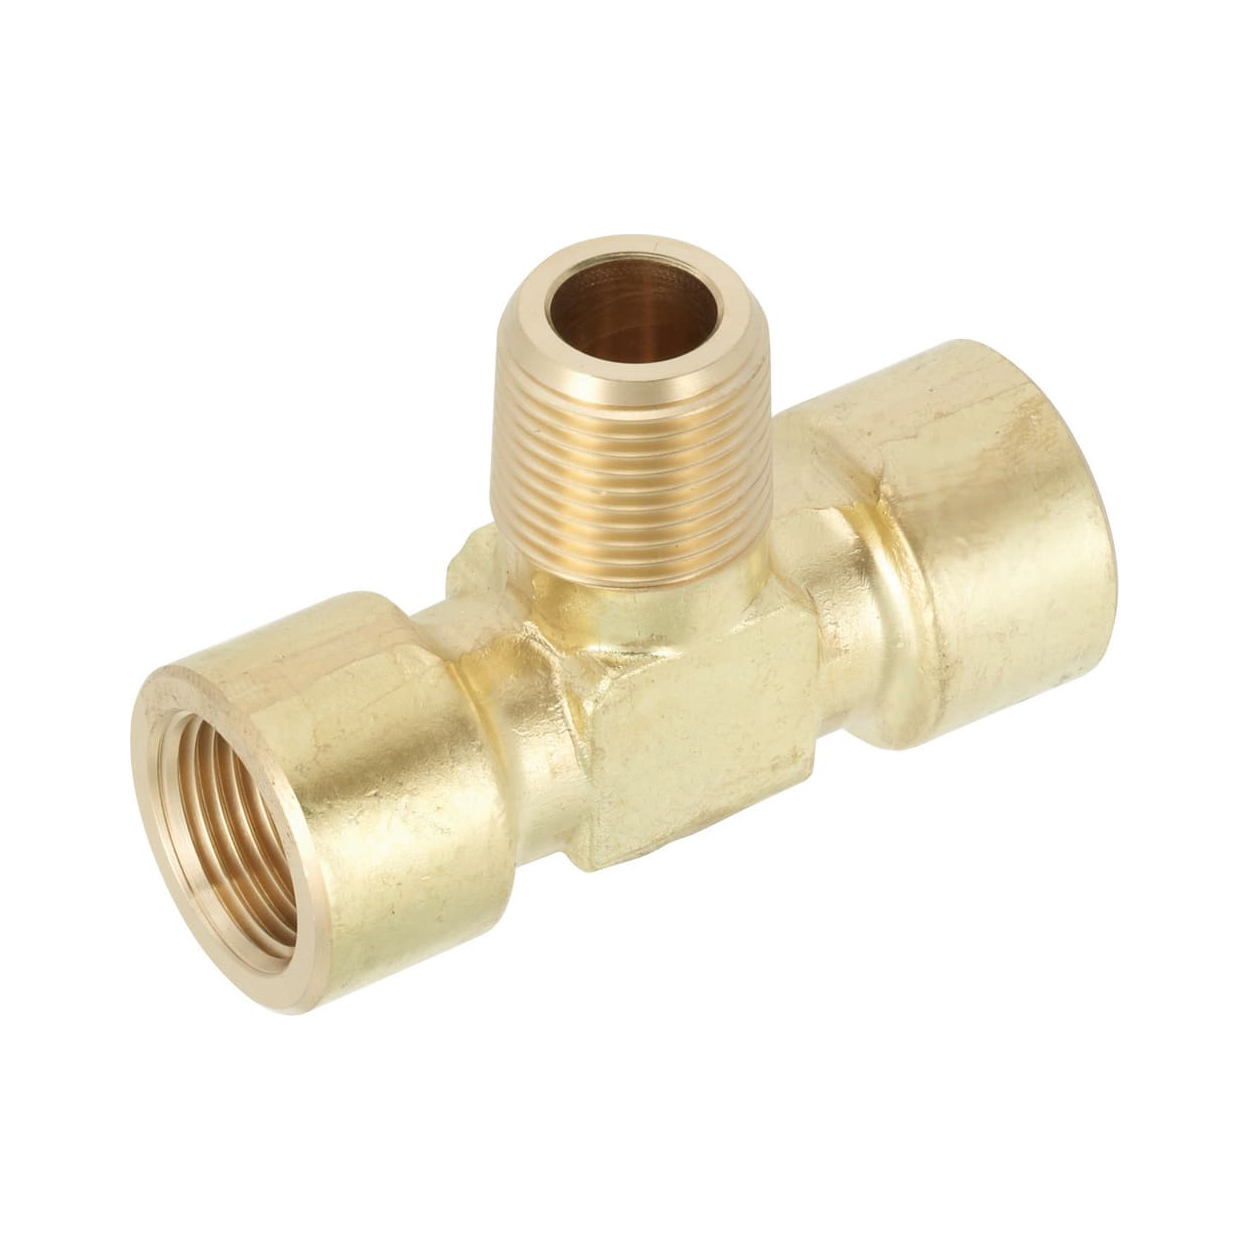 Brass Fittings for Steel Pipe / Tee / Threaded / Tapped SJSXT10A